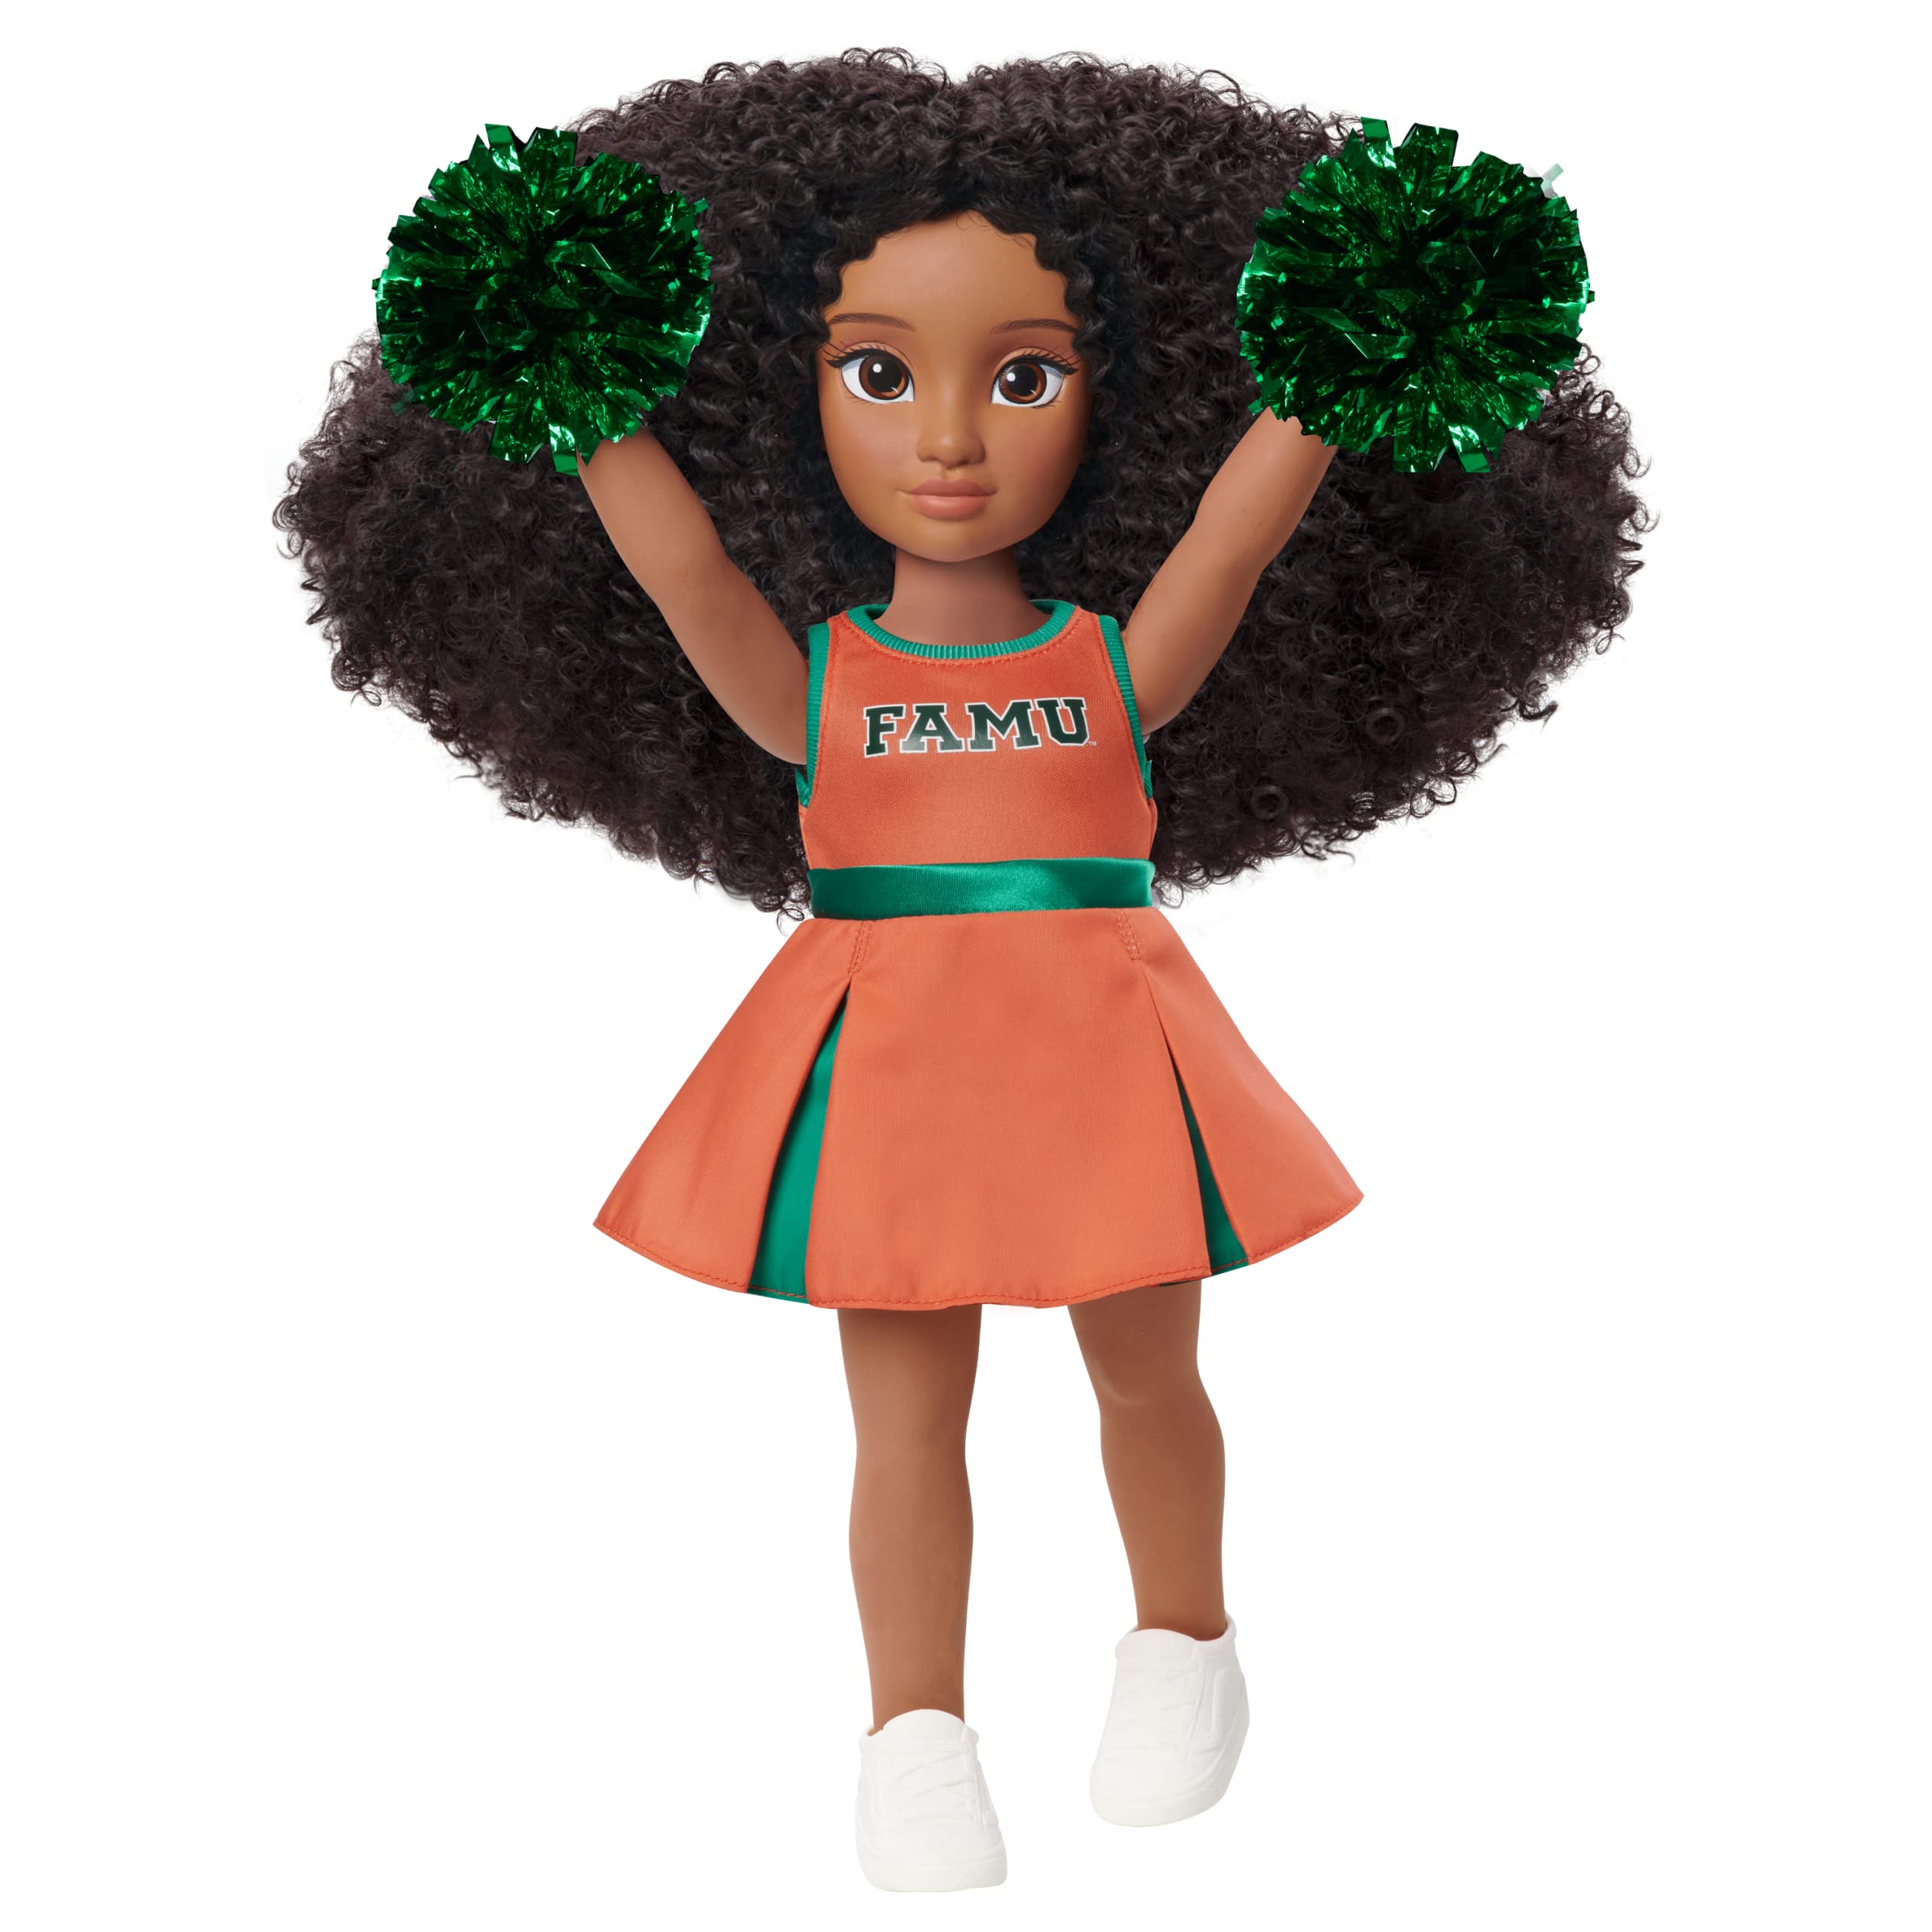 Purpose Toys HBCyoU FAMU Cheer Captain Alyssa 18-inch Doll & Accessories, Curly Hair, Medium Brown Skin Tone, Designed and Developed